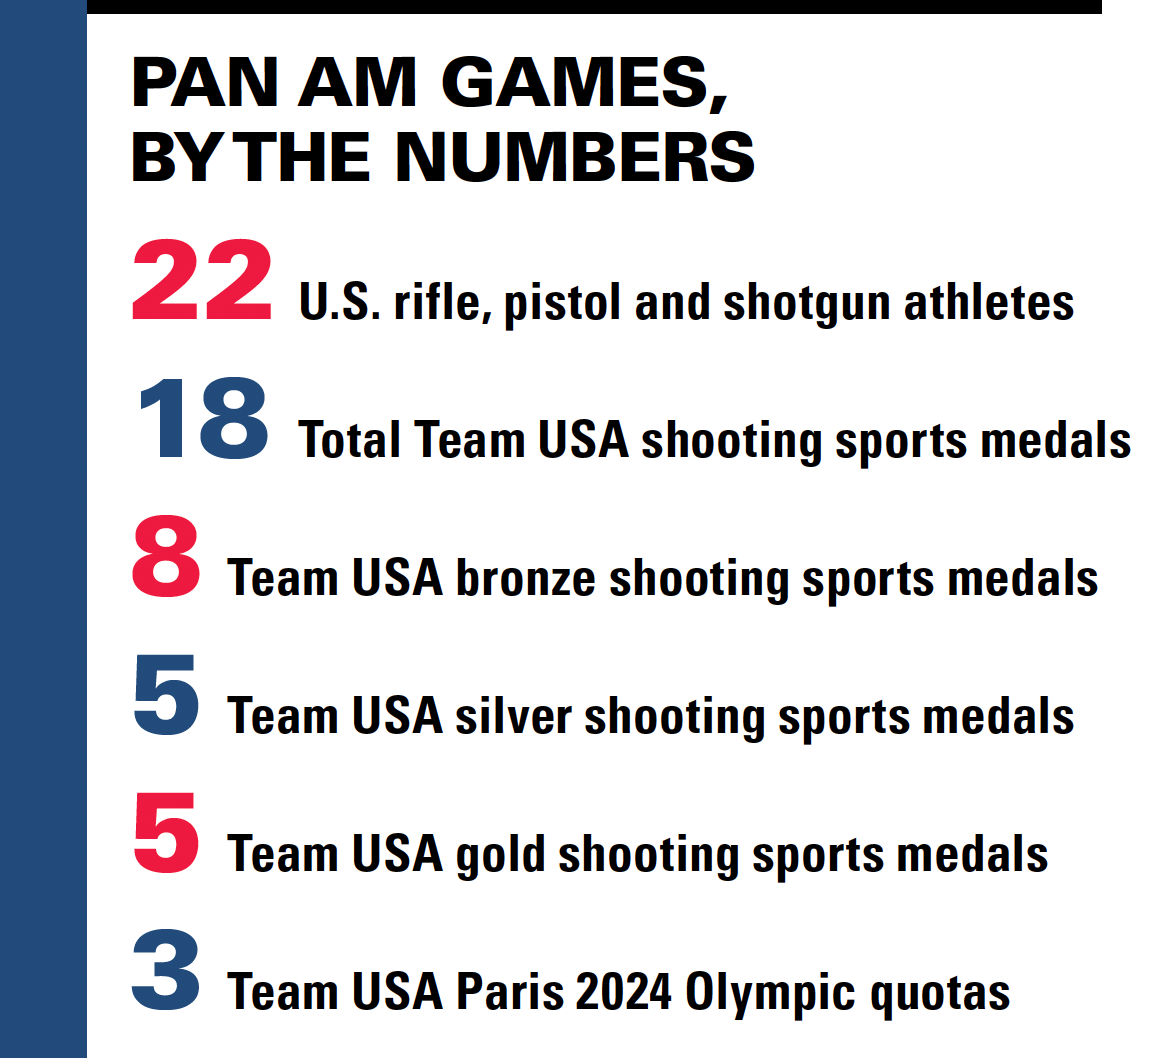 USA Shooting at Pan Am Games, By The Numbers